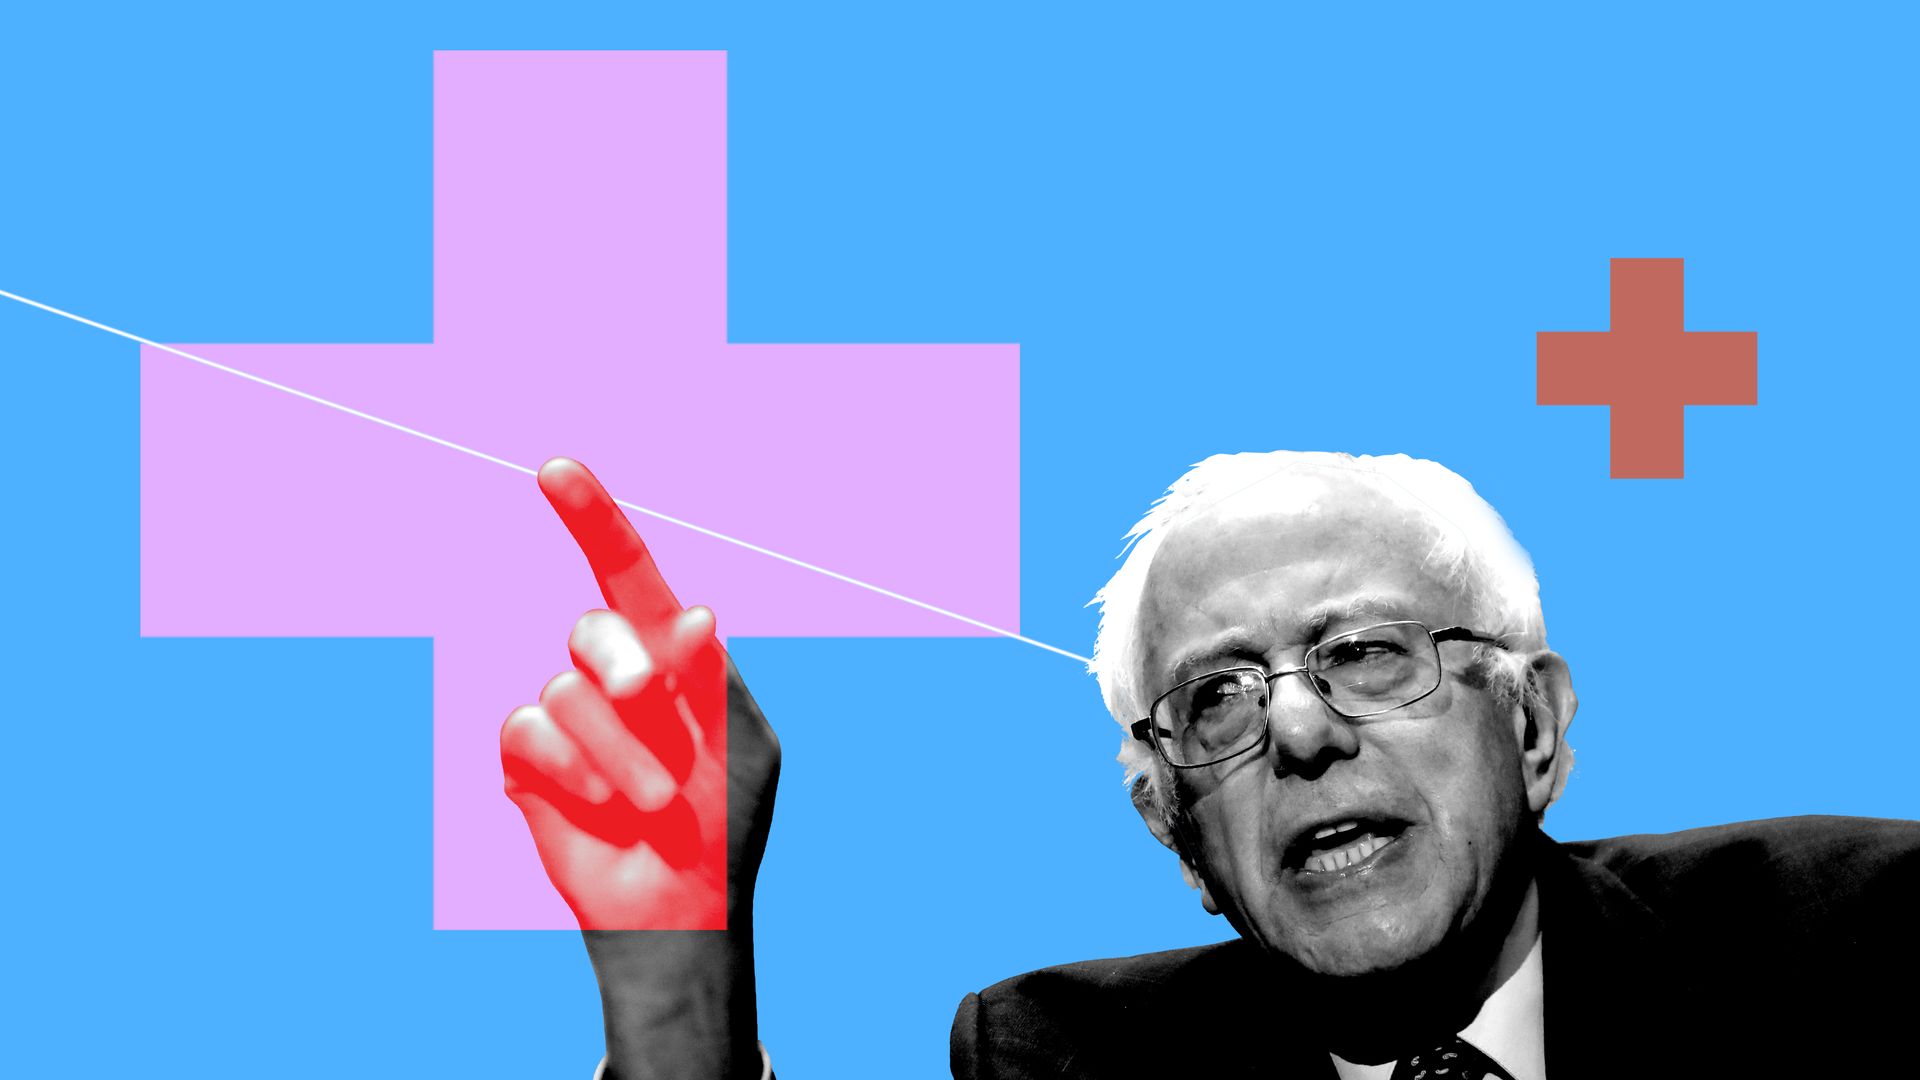 Illustrated collage of Bernie Sanders with red crosses.